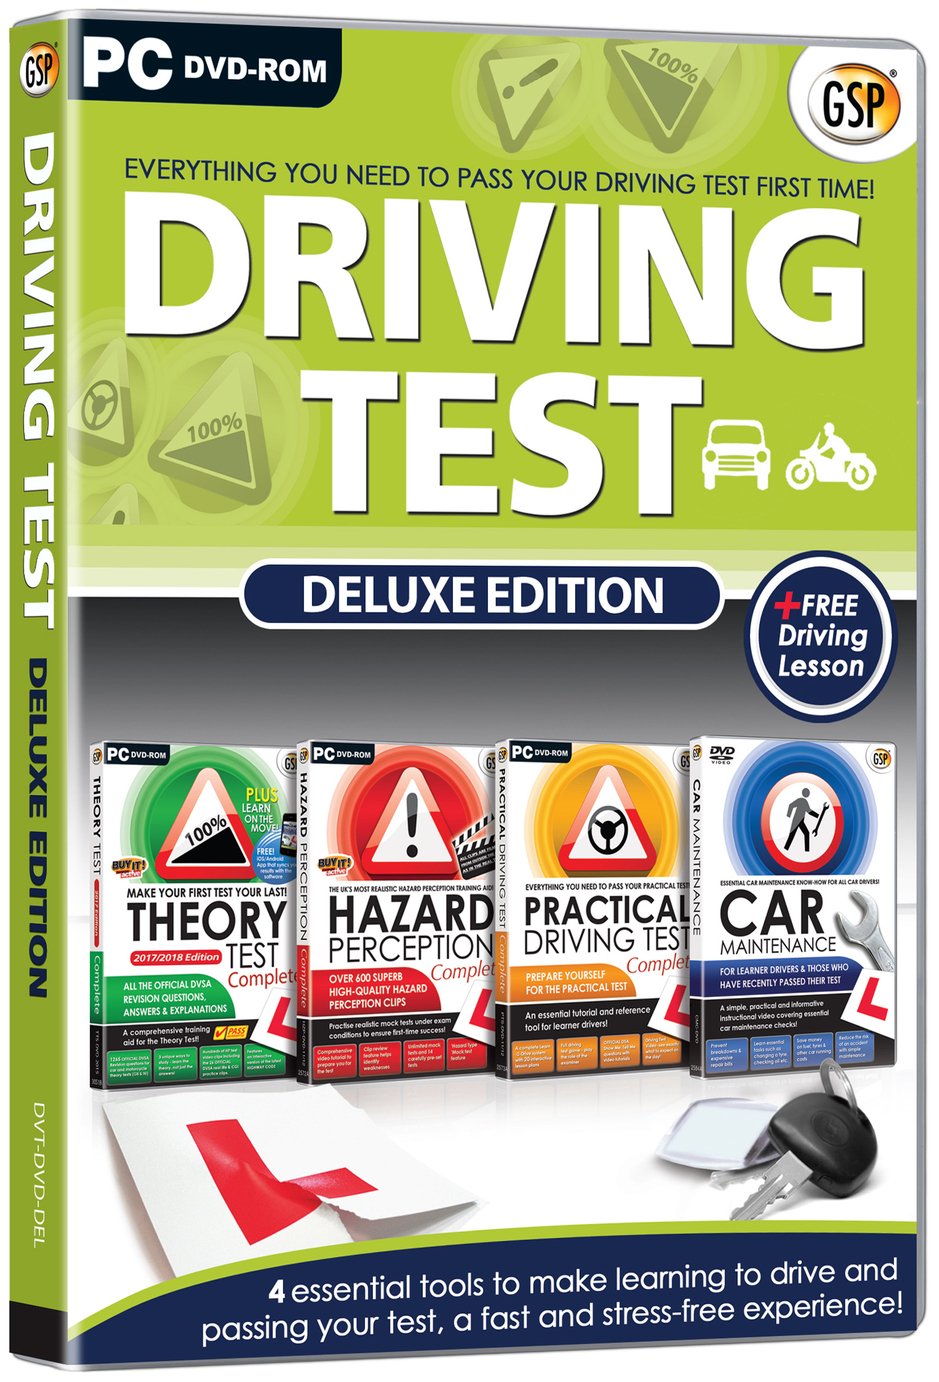 Driving Test Deluxe PC DVD ROM Review